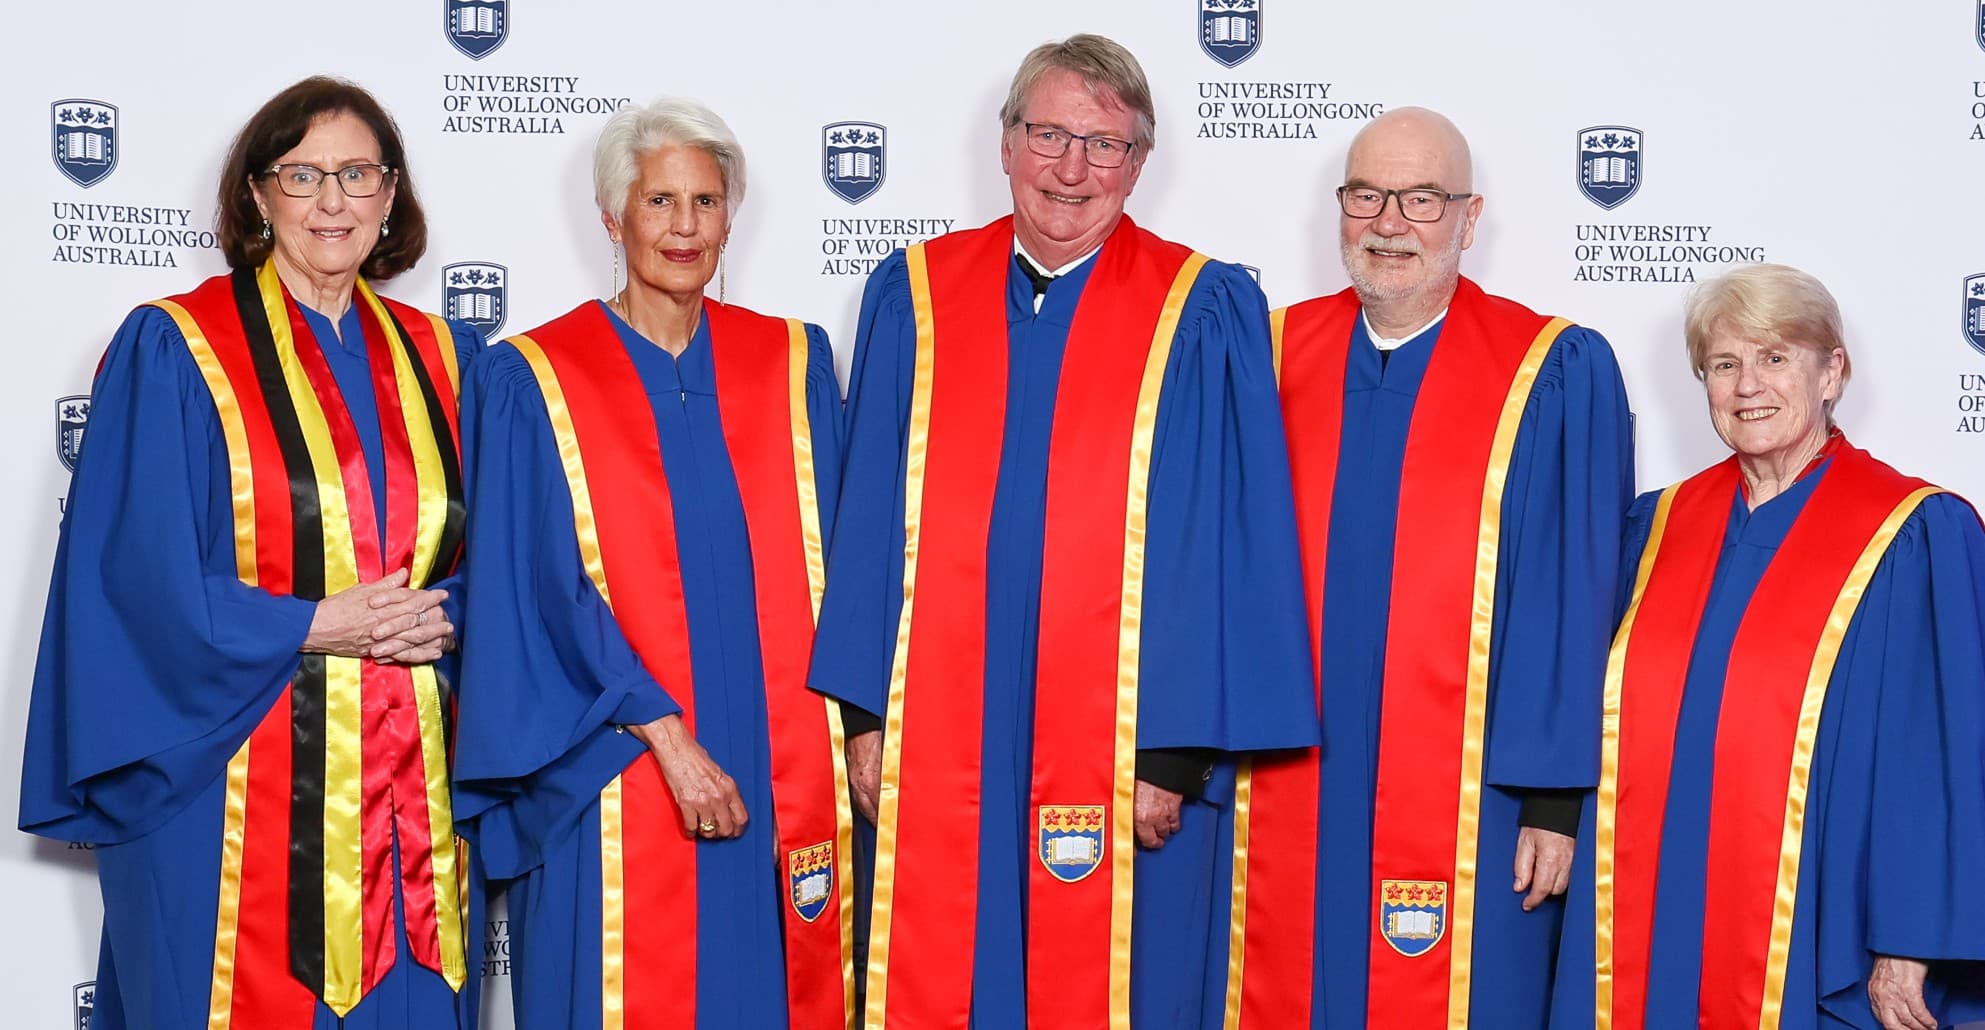 From left, Dr Christine Gillies, Dr Elizabeth Magassy, Mr Barry Irvin, Associate Professor Rodney Vickers and Ms Rosalie Montagner. All are smiling at the camera and wearing the bright red and blue UOW robes. Photo: Denis Ivaneza